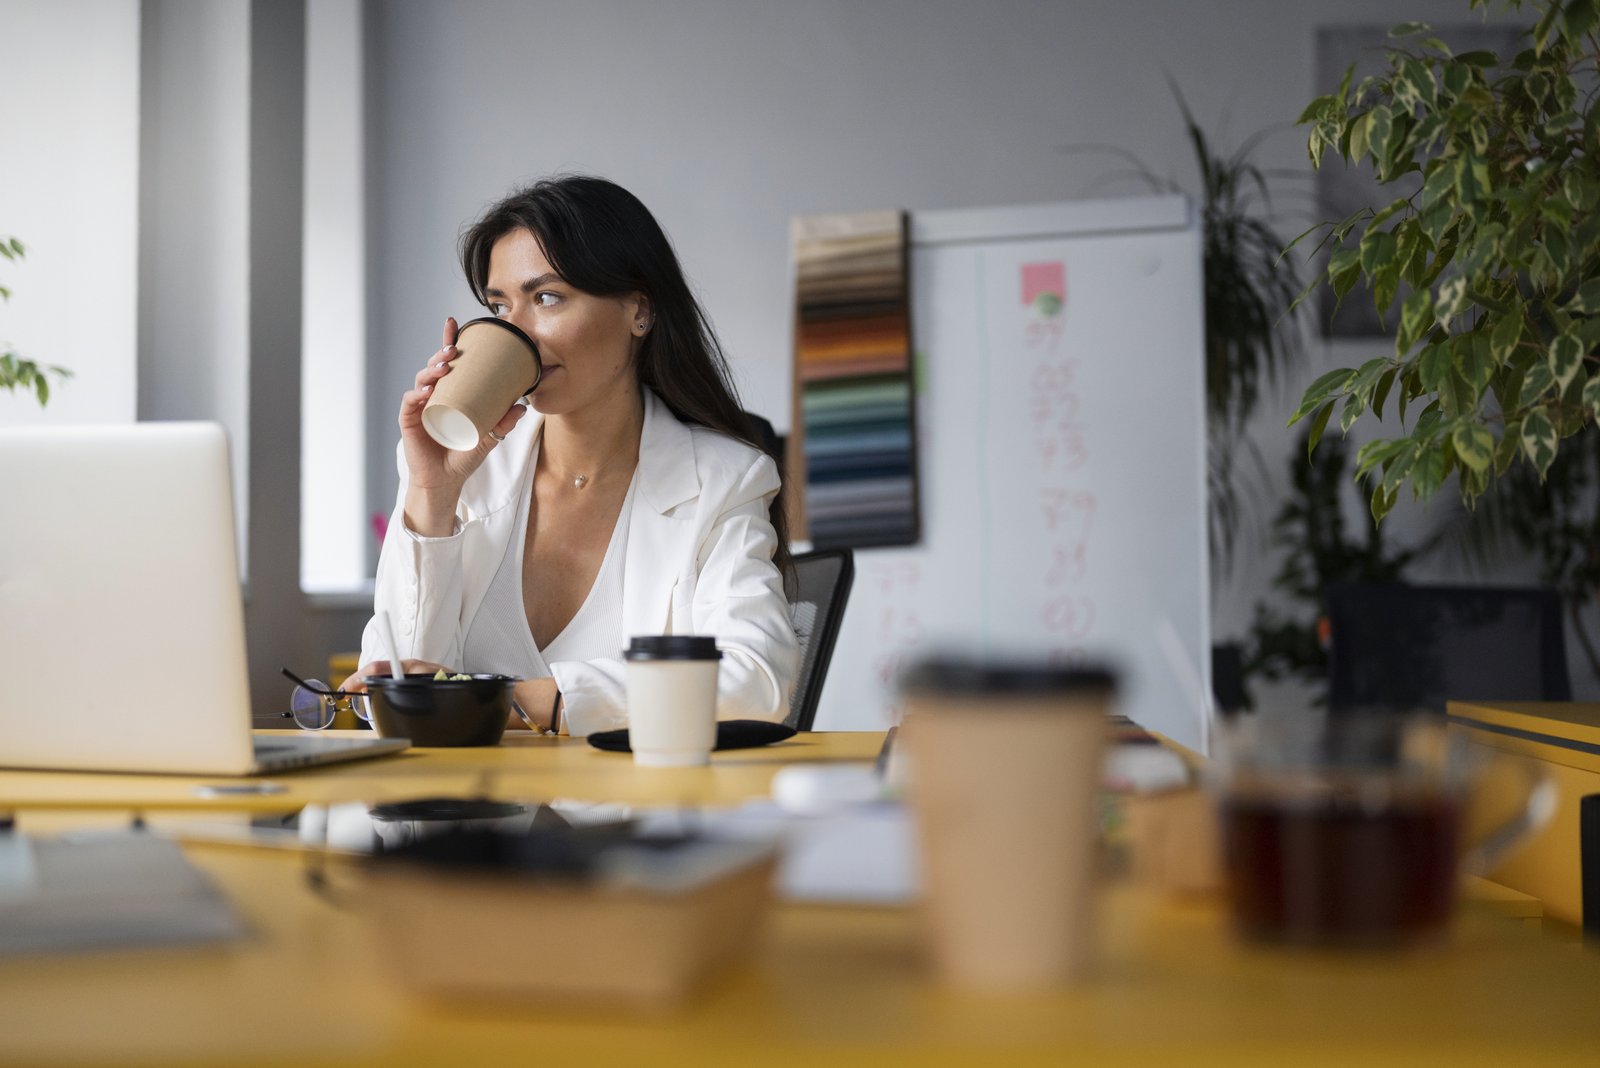 Sitting For Long? Drinking Coffee May Help Offset Mortality Risk